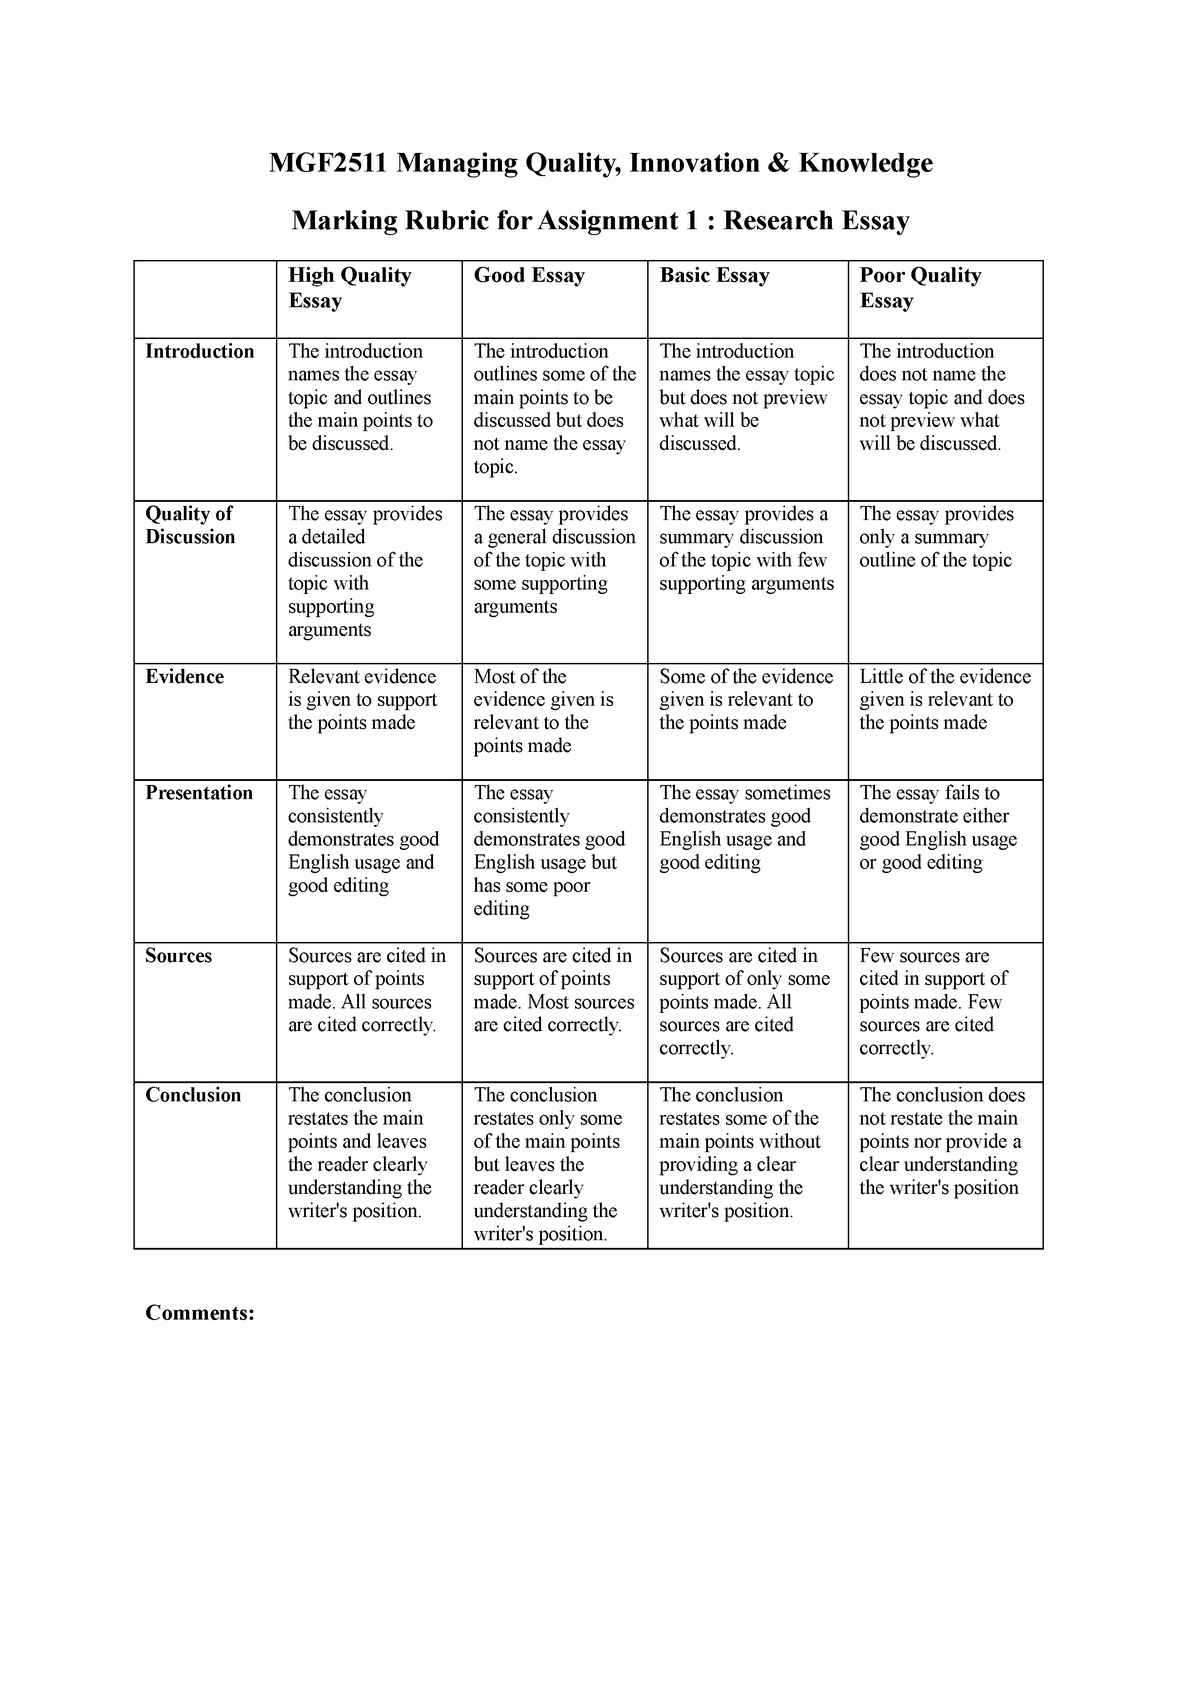 commercial assignment rubric